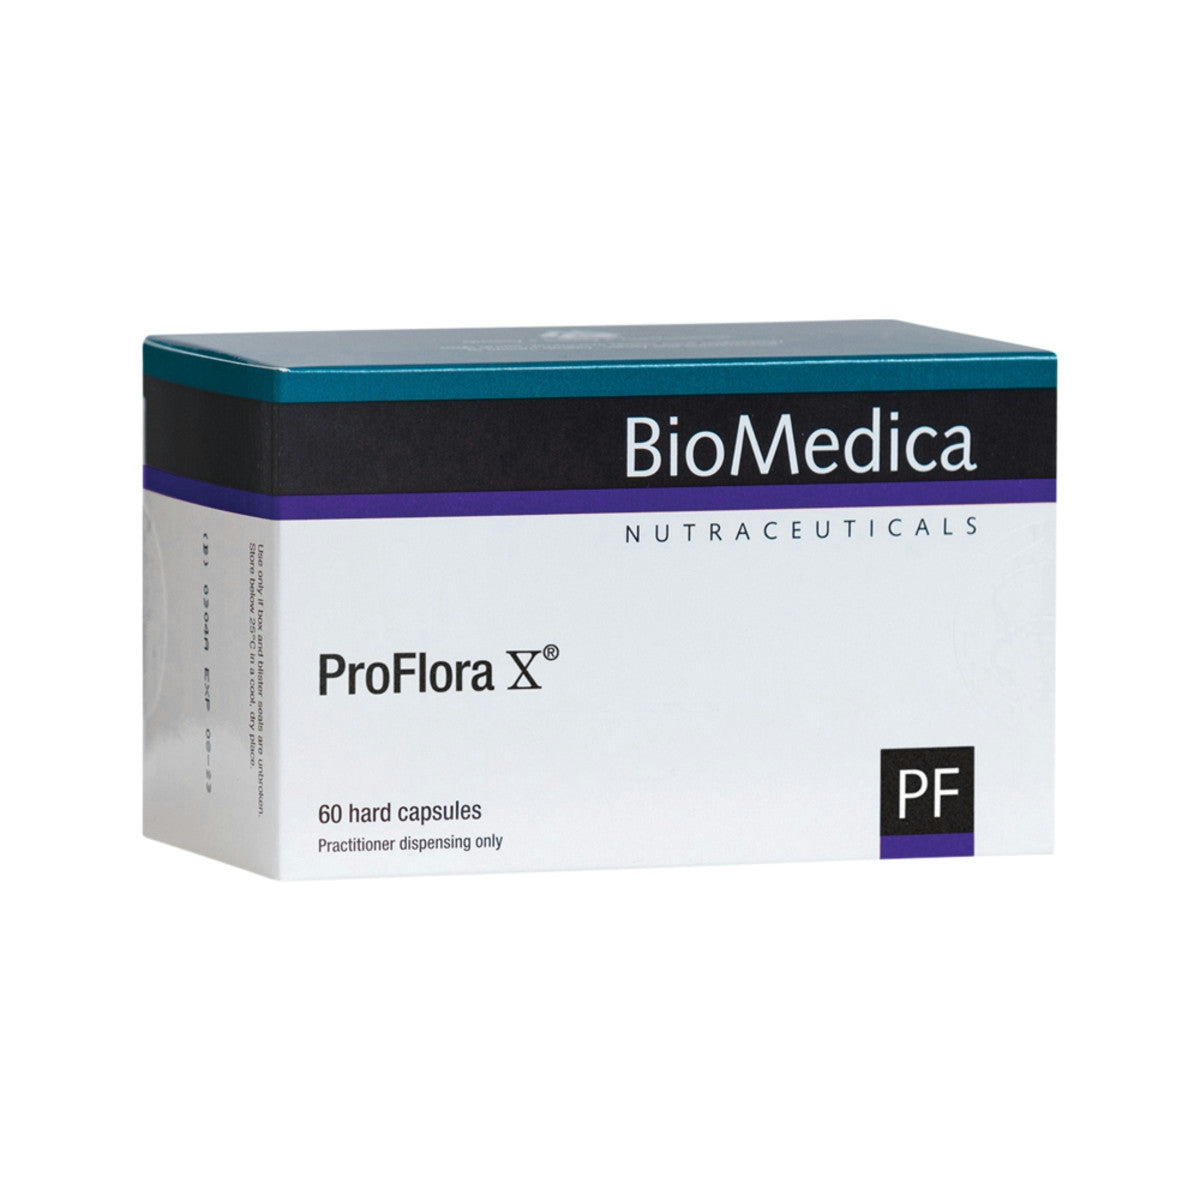 image of Biomedica ProFlora X 60c with white background